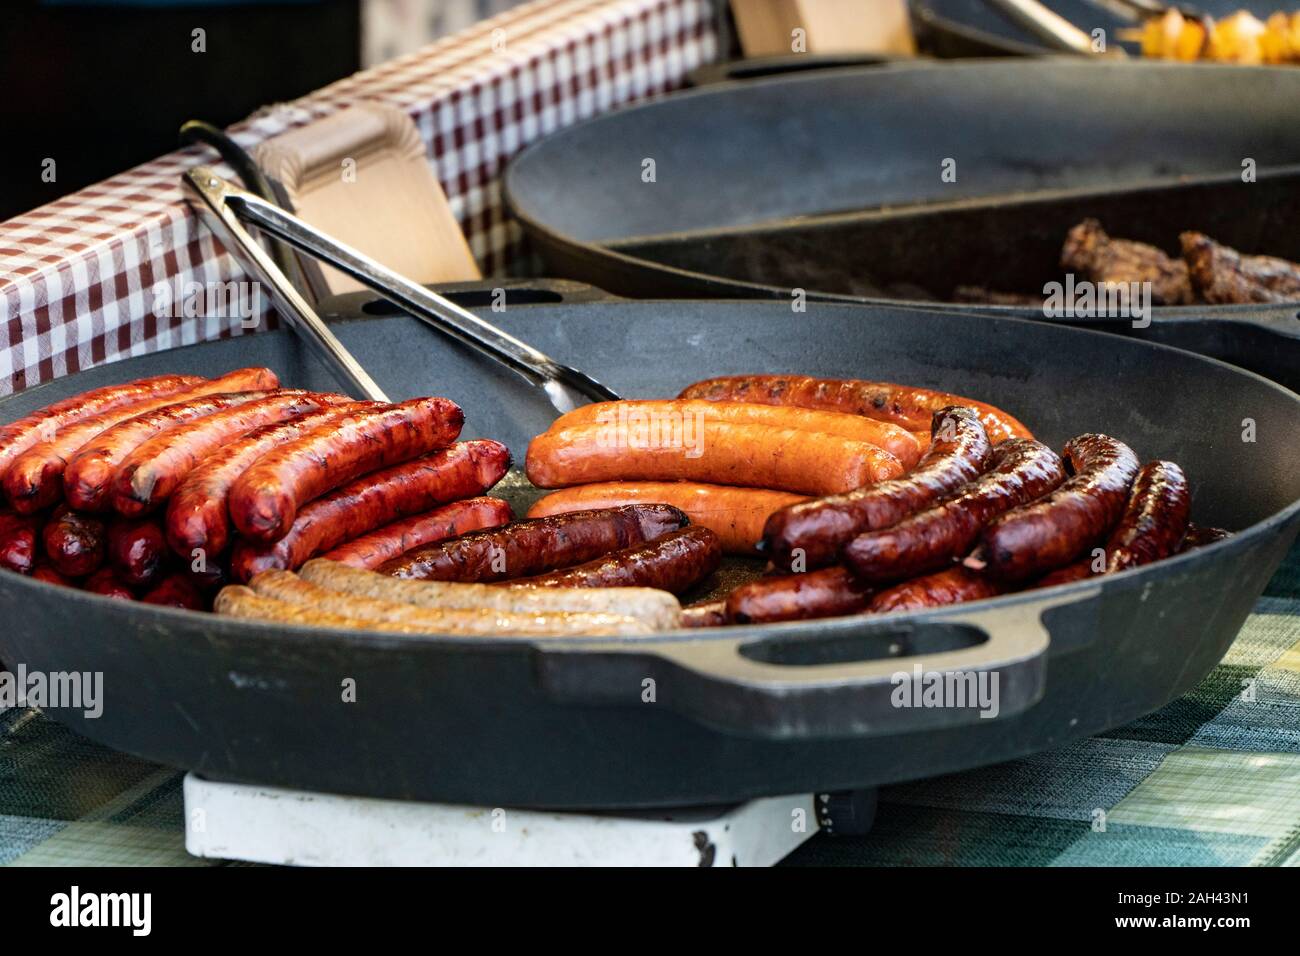 Prague, Czech Republic 2019:Traditional hot dog preparation on coal fire on the street during the Christmas market Stock Photo